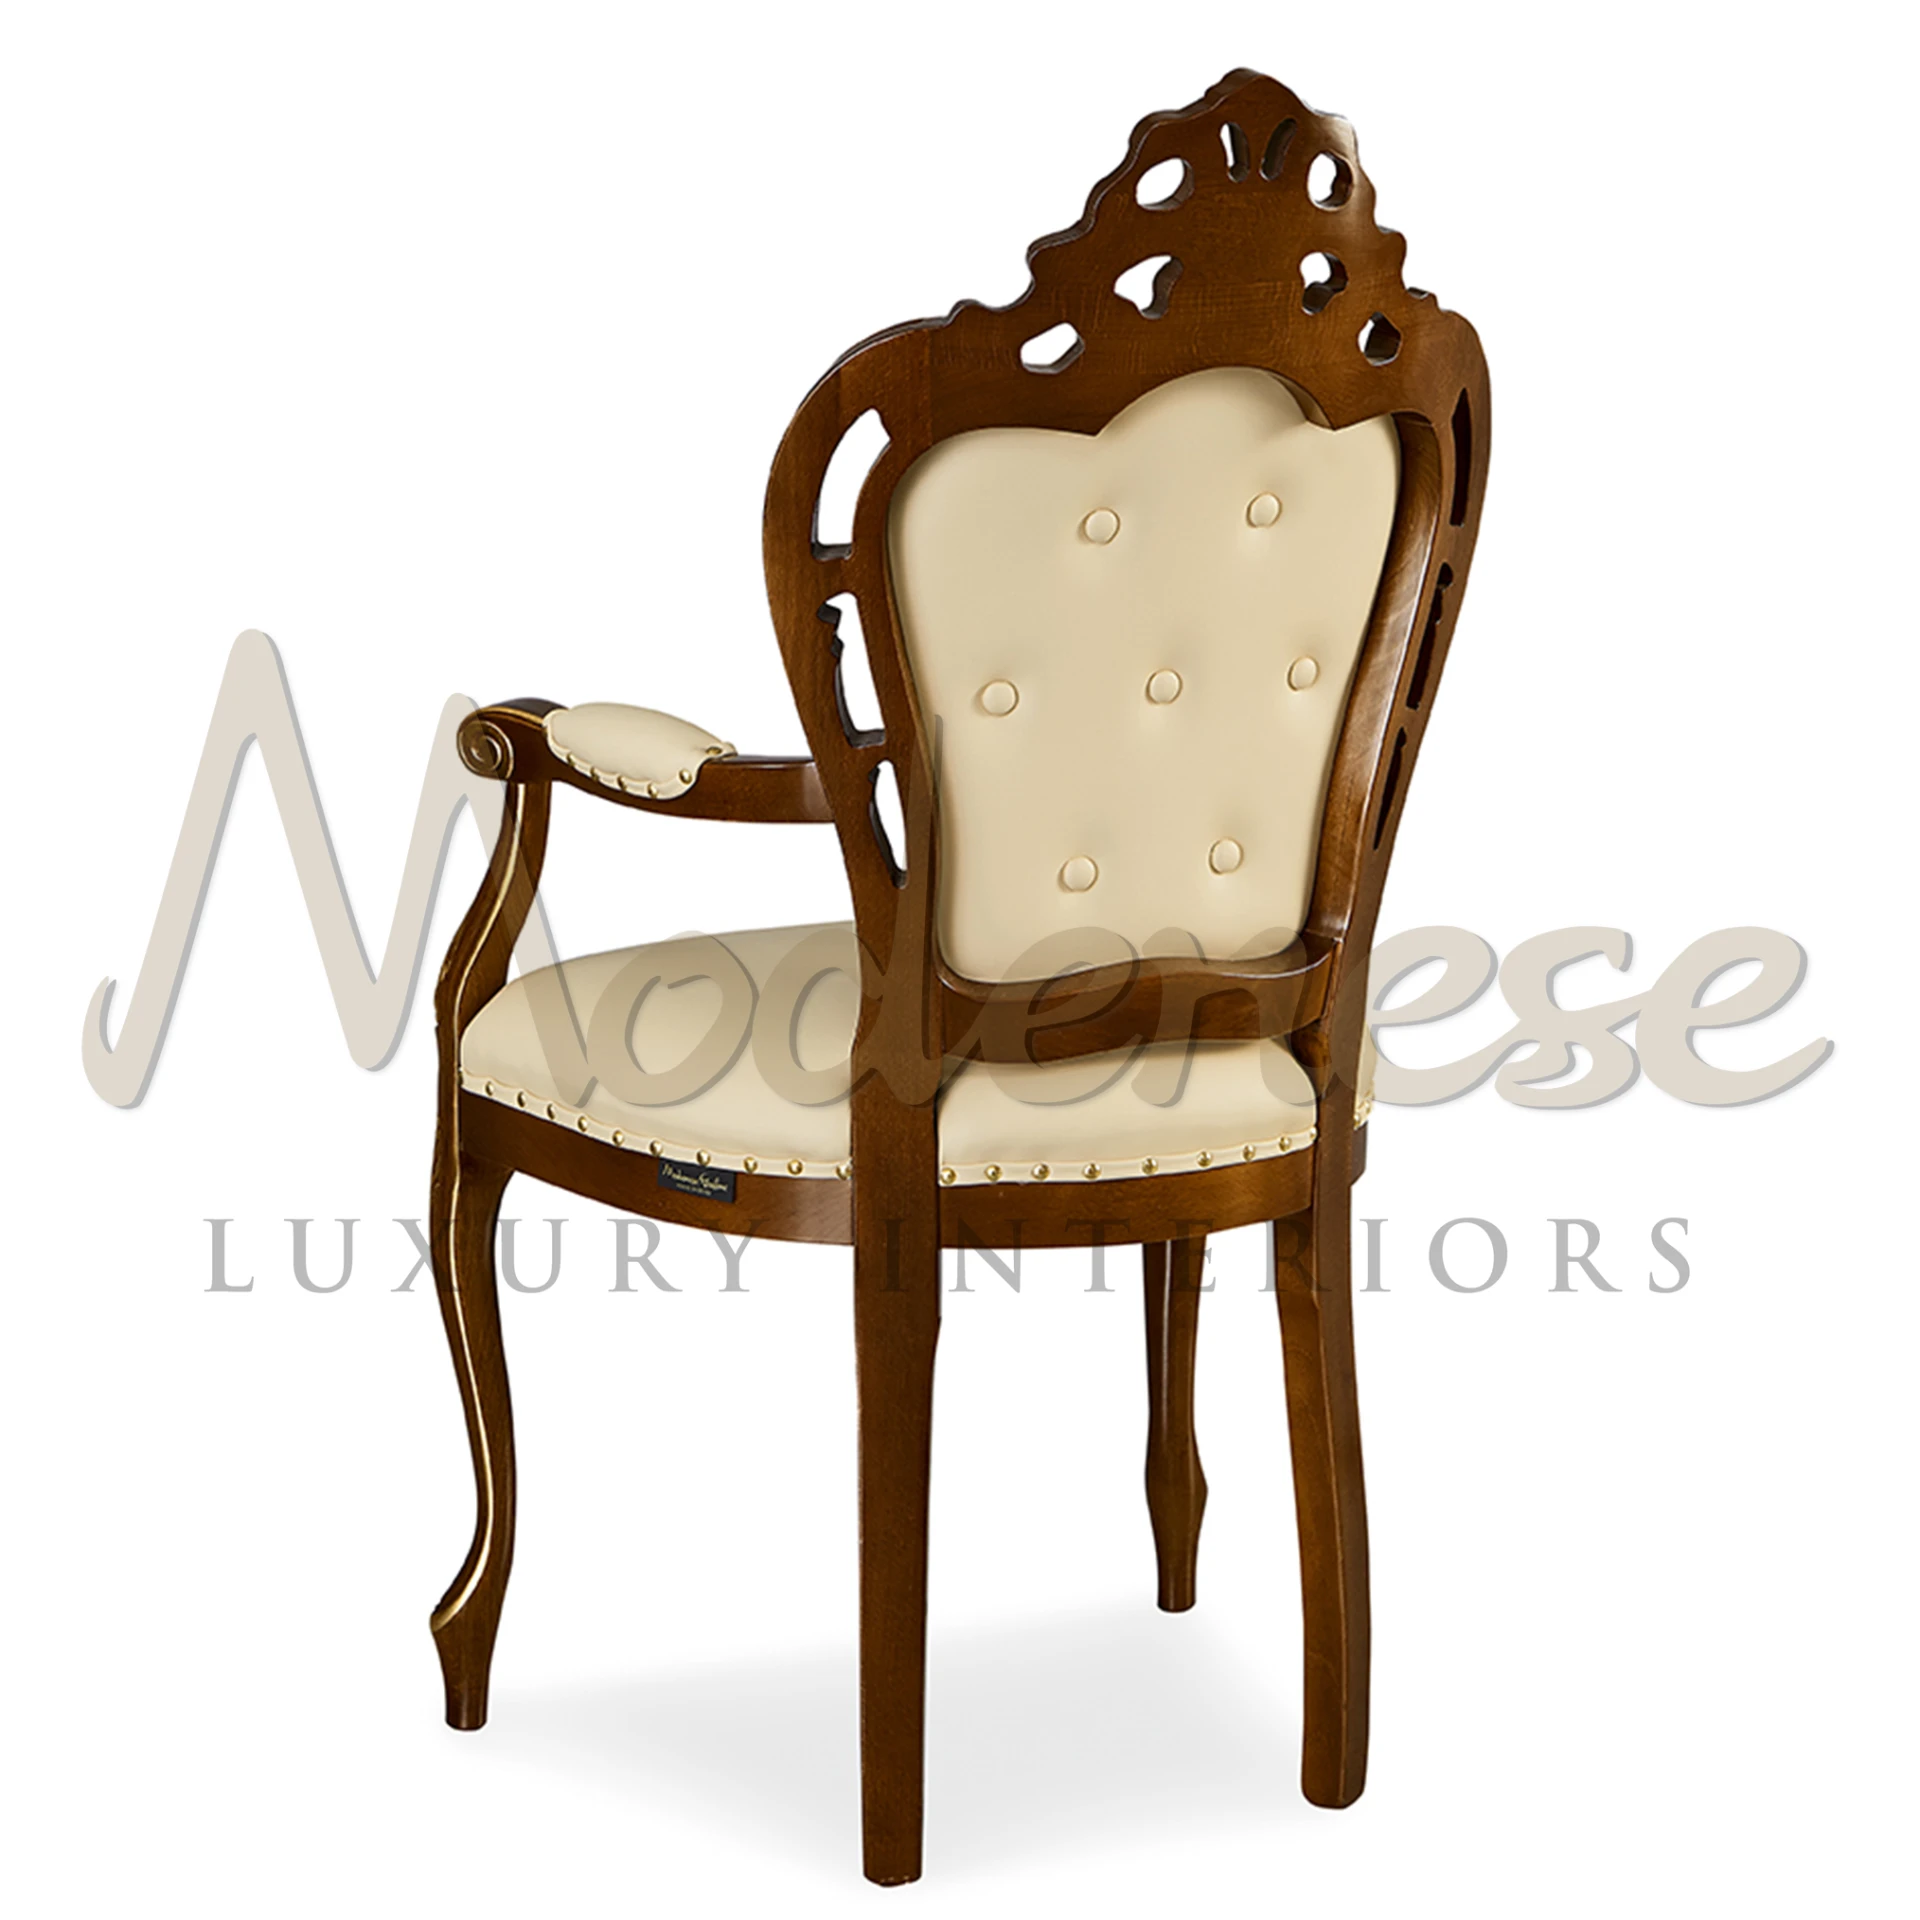 Renaissance Chair with Armrests with cream leather a statement of sophistication.